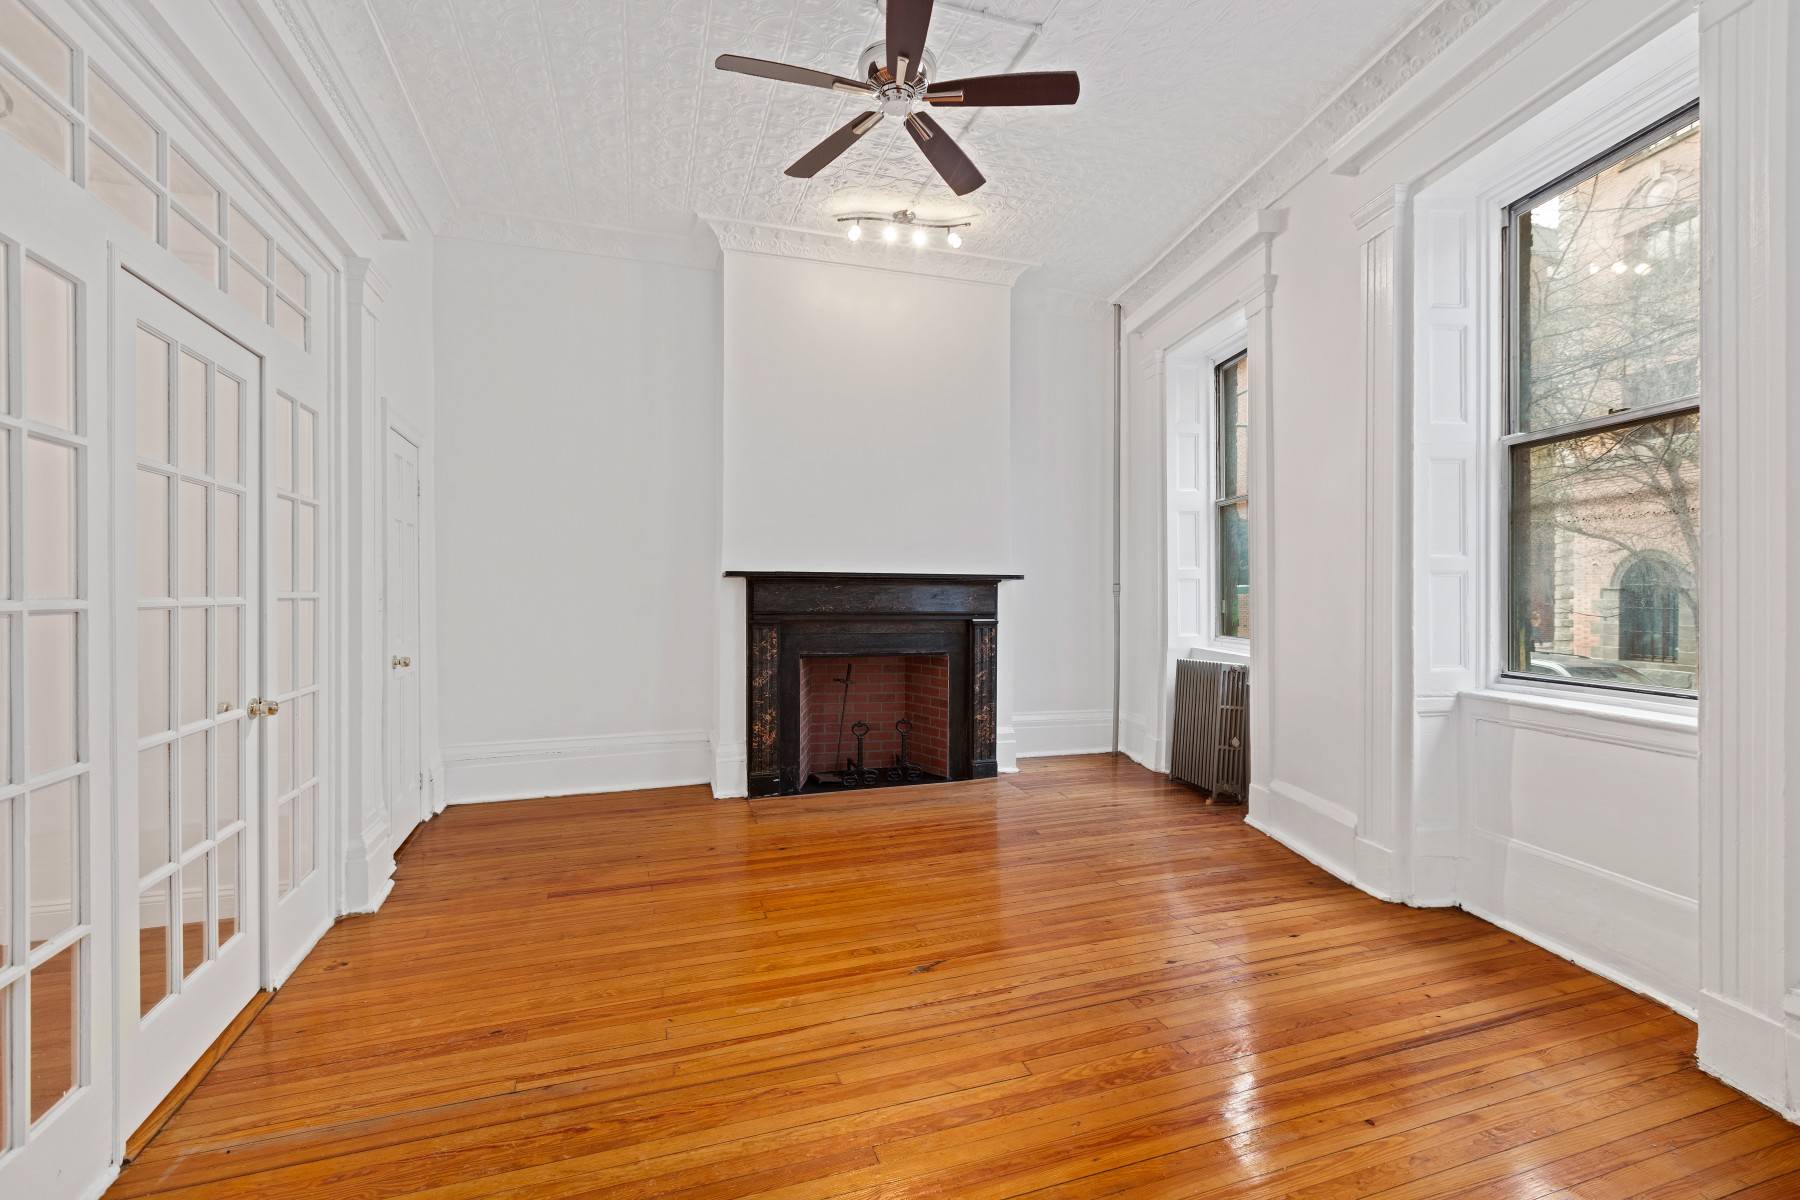 Large 1 bedroom, 1 bathroom is on the 1st floor features original details with crown moldings.